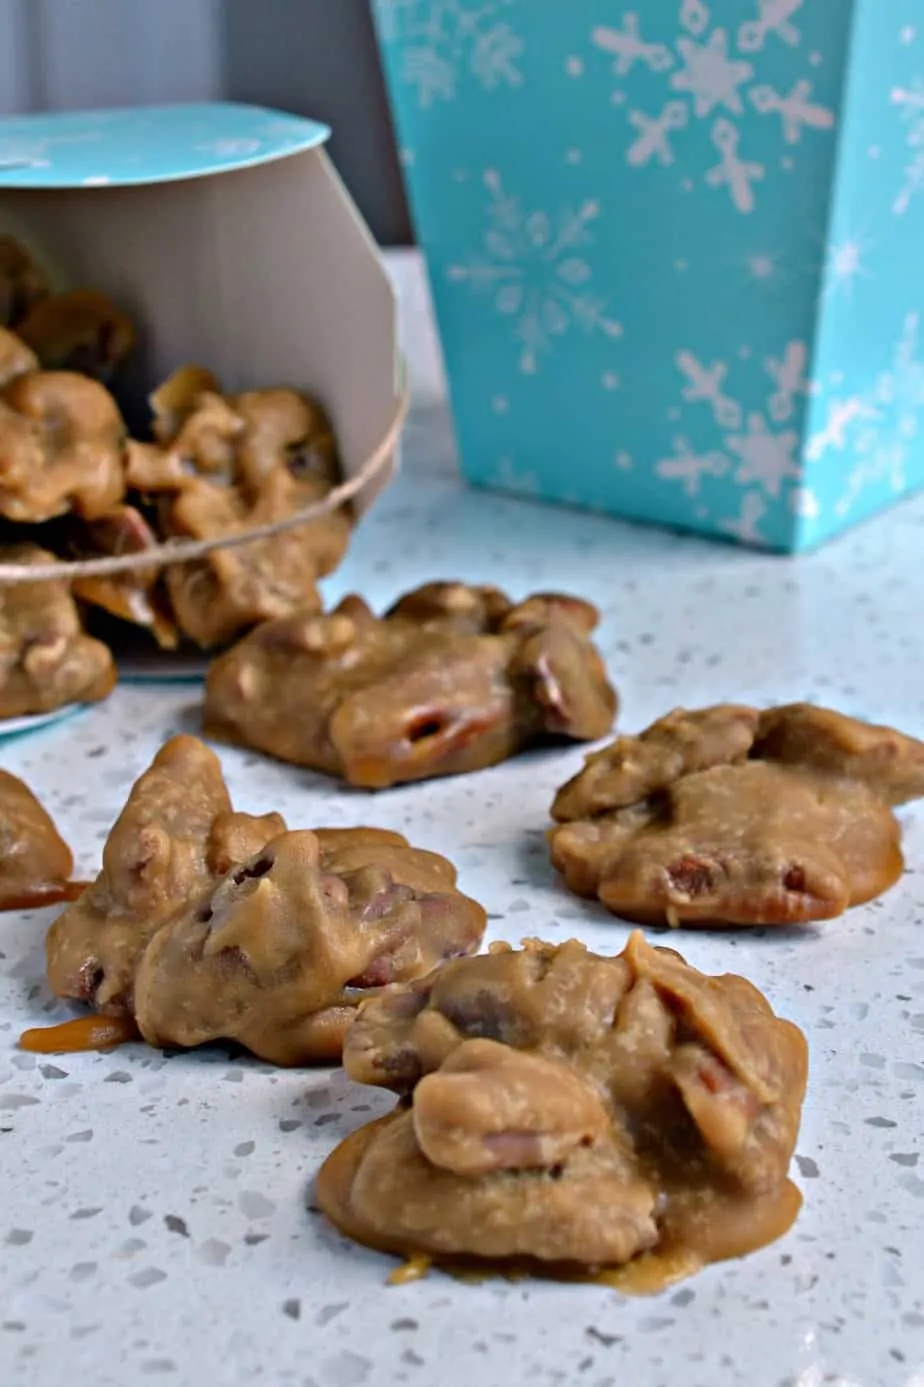 Southern Pecan Pralines are sweet brown sugar caramel like candy treasures filled with roasted pecans. 